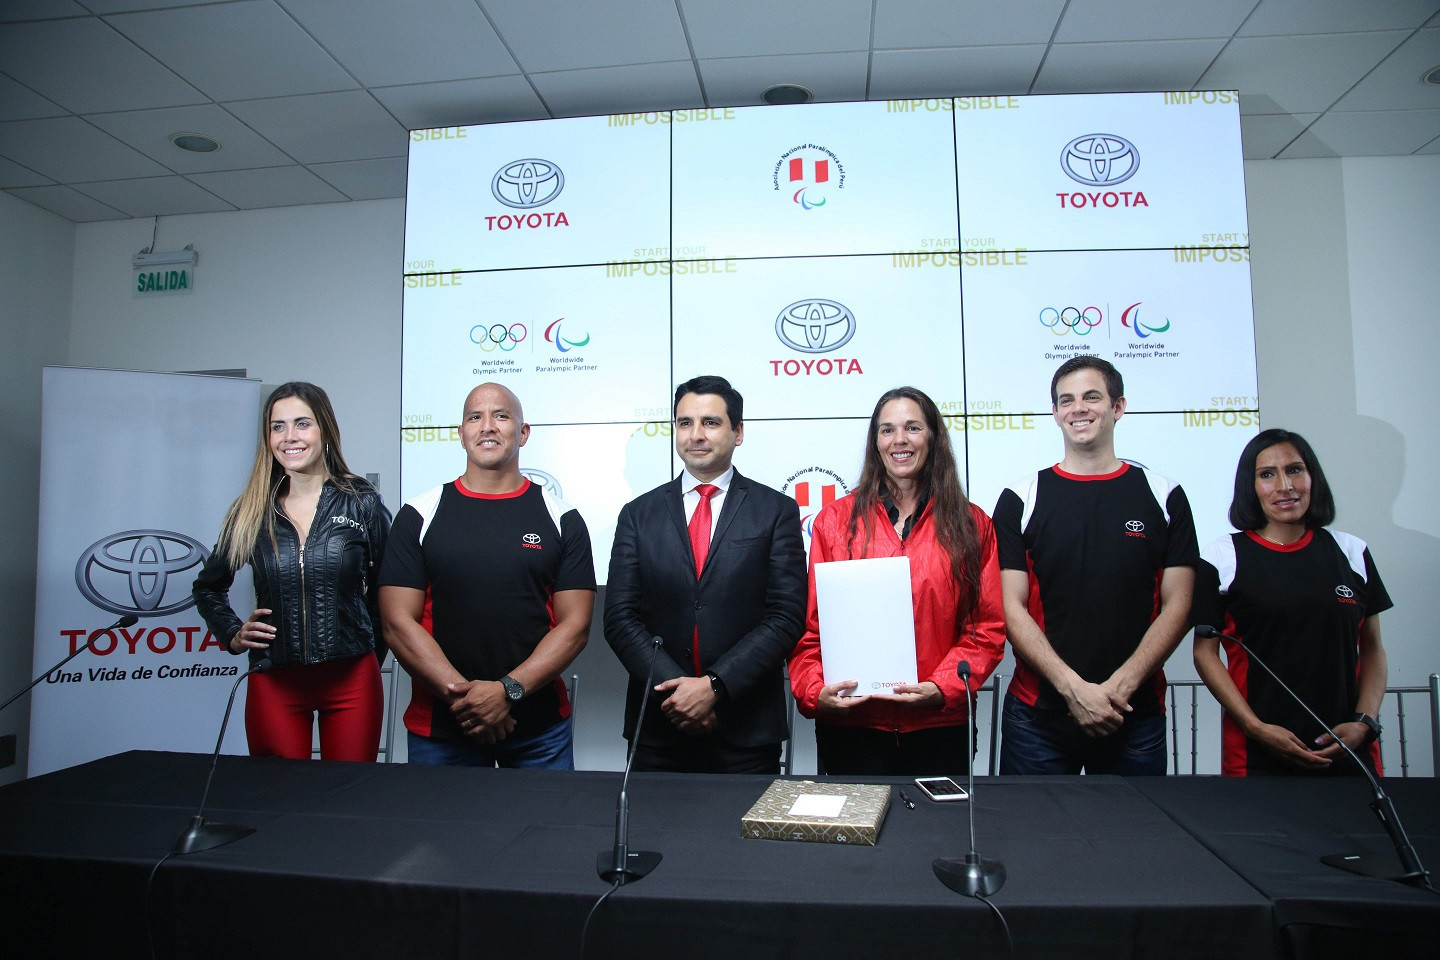 The deal between the National Paralympic Association of Peru and Toyota includes badminton player and athlete Pedro Pablo de Vinatea and Carlos Felipa becoming ambassadors for the Japanese car manufacturer ©ANPP